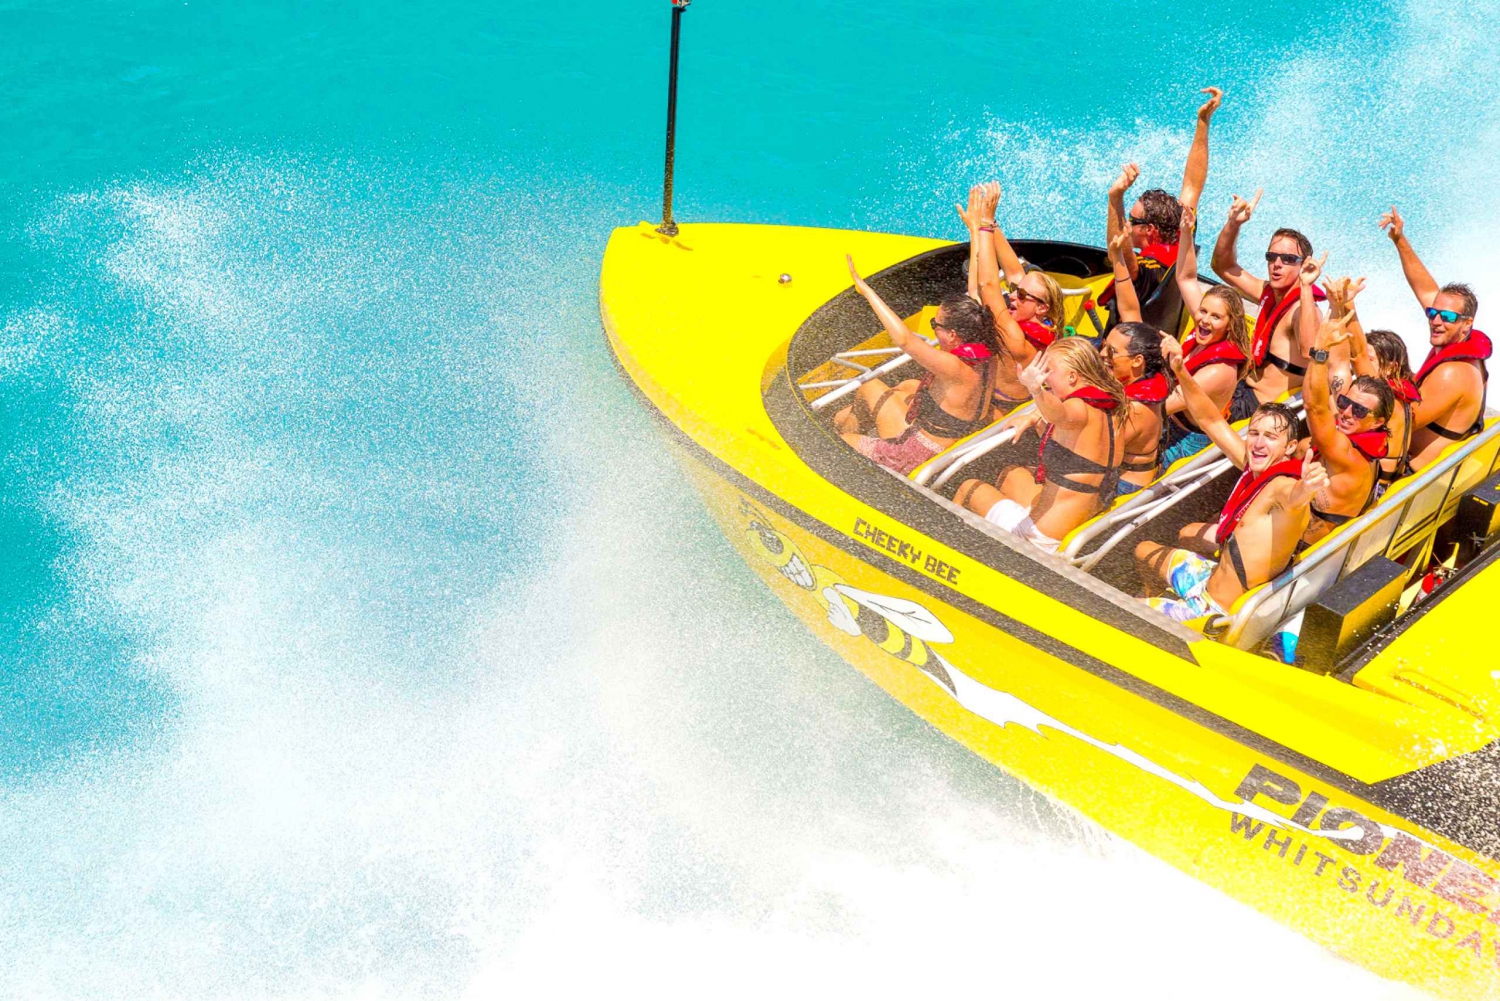 Airlie Beach: 30-Minute Jet Boat Ride